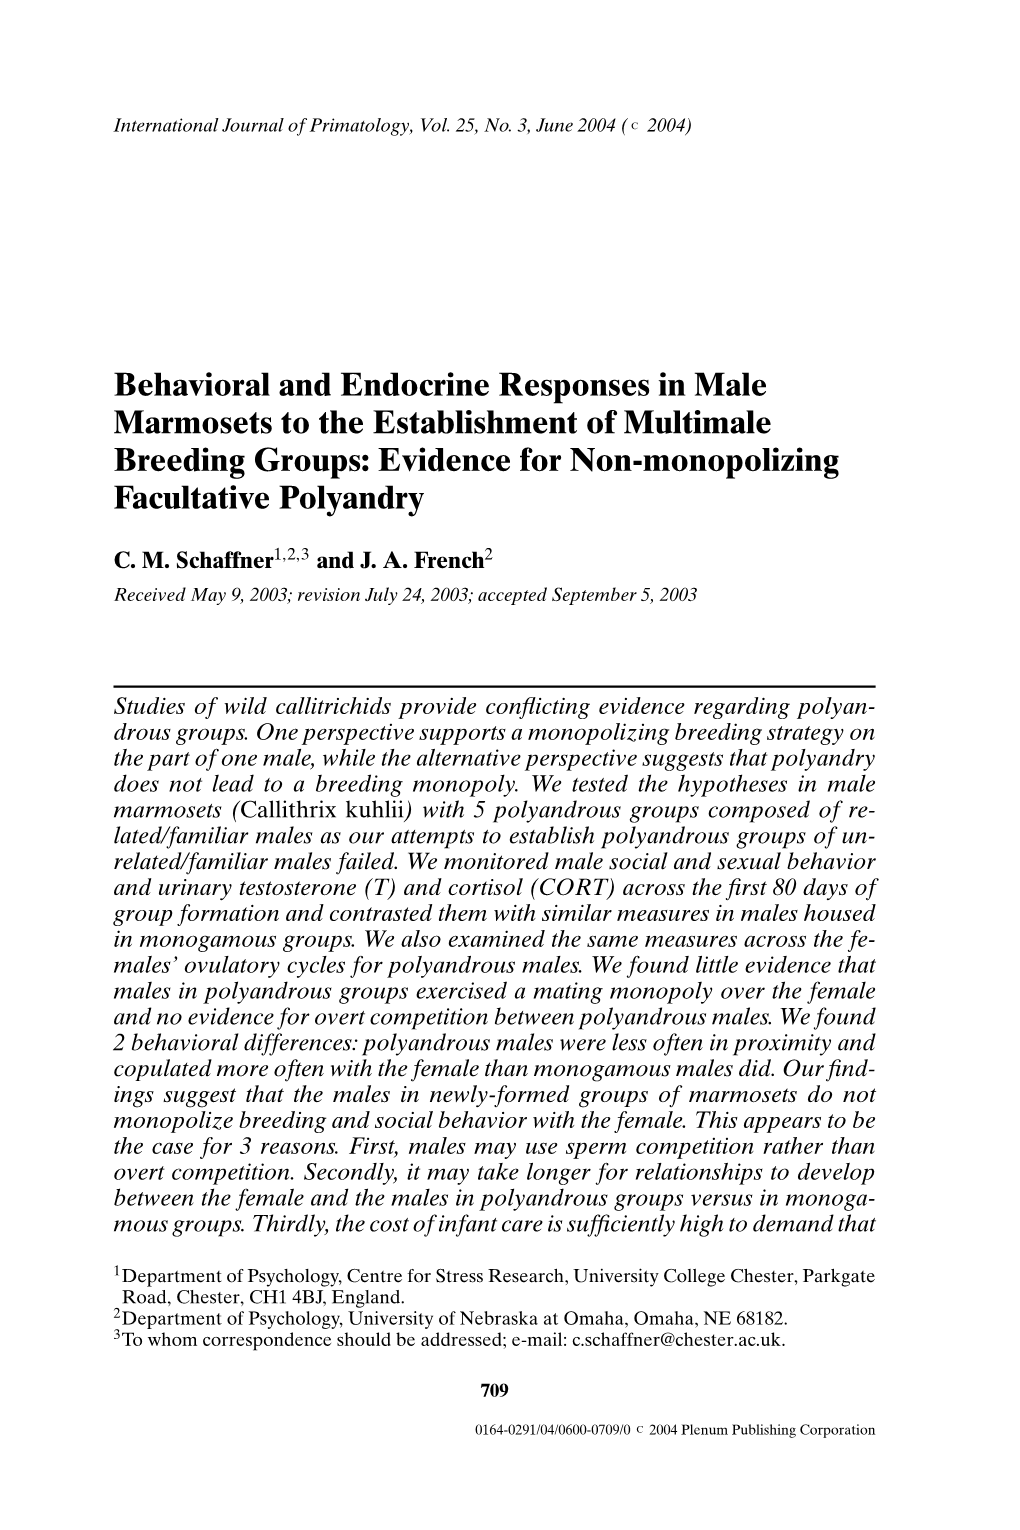 Behavioral and Endocrine Responses in Male Marmosets to the Establishment of Multimale Breeding Groups: Evidence for Non-Monopolizing Facultative Polyandry